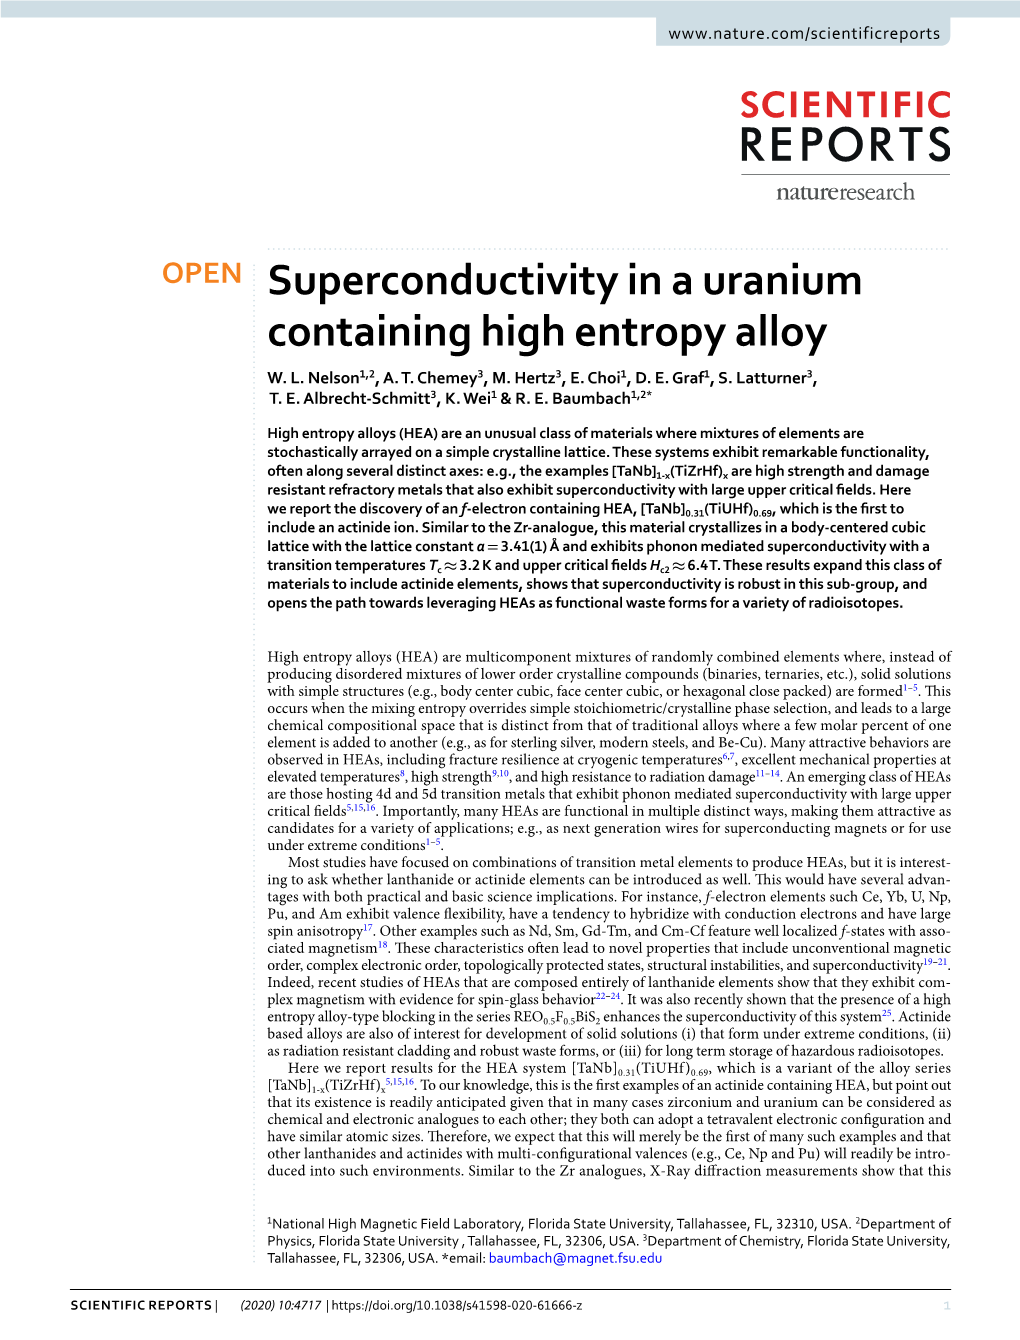 Superconductivity in a Uranium Containing High Entropy Alloy W